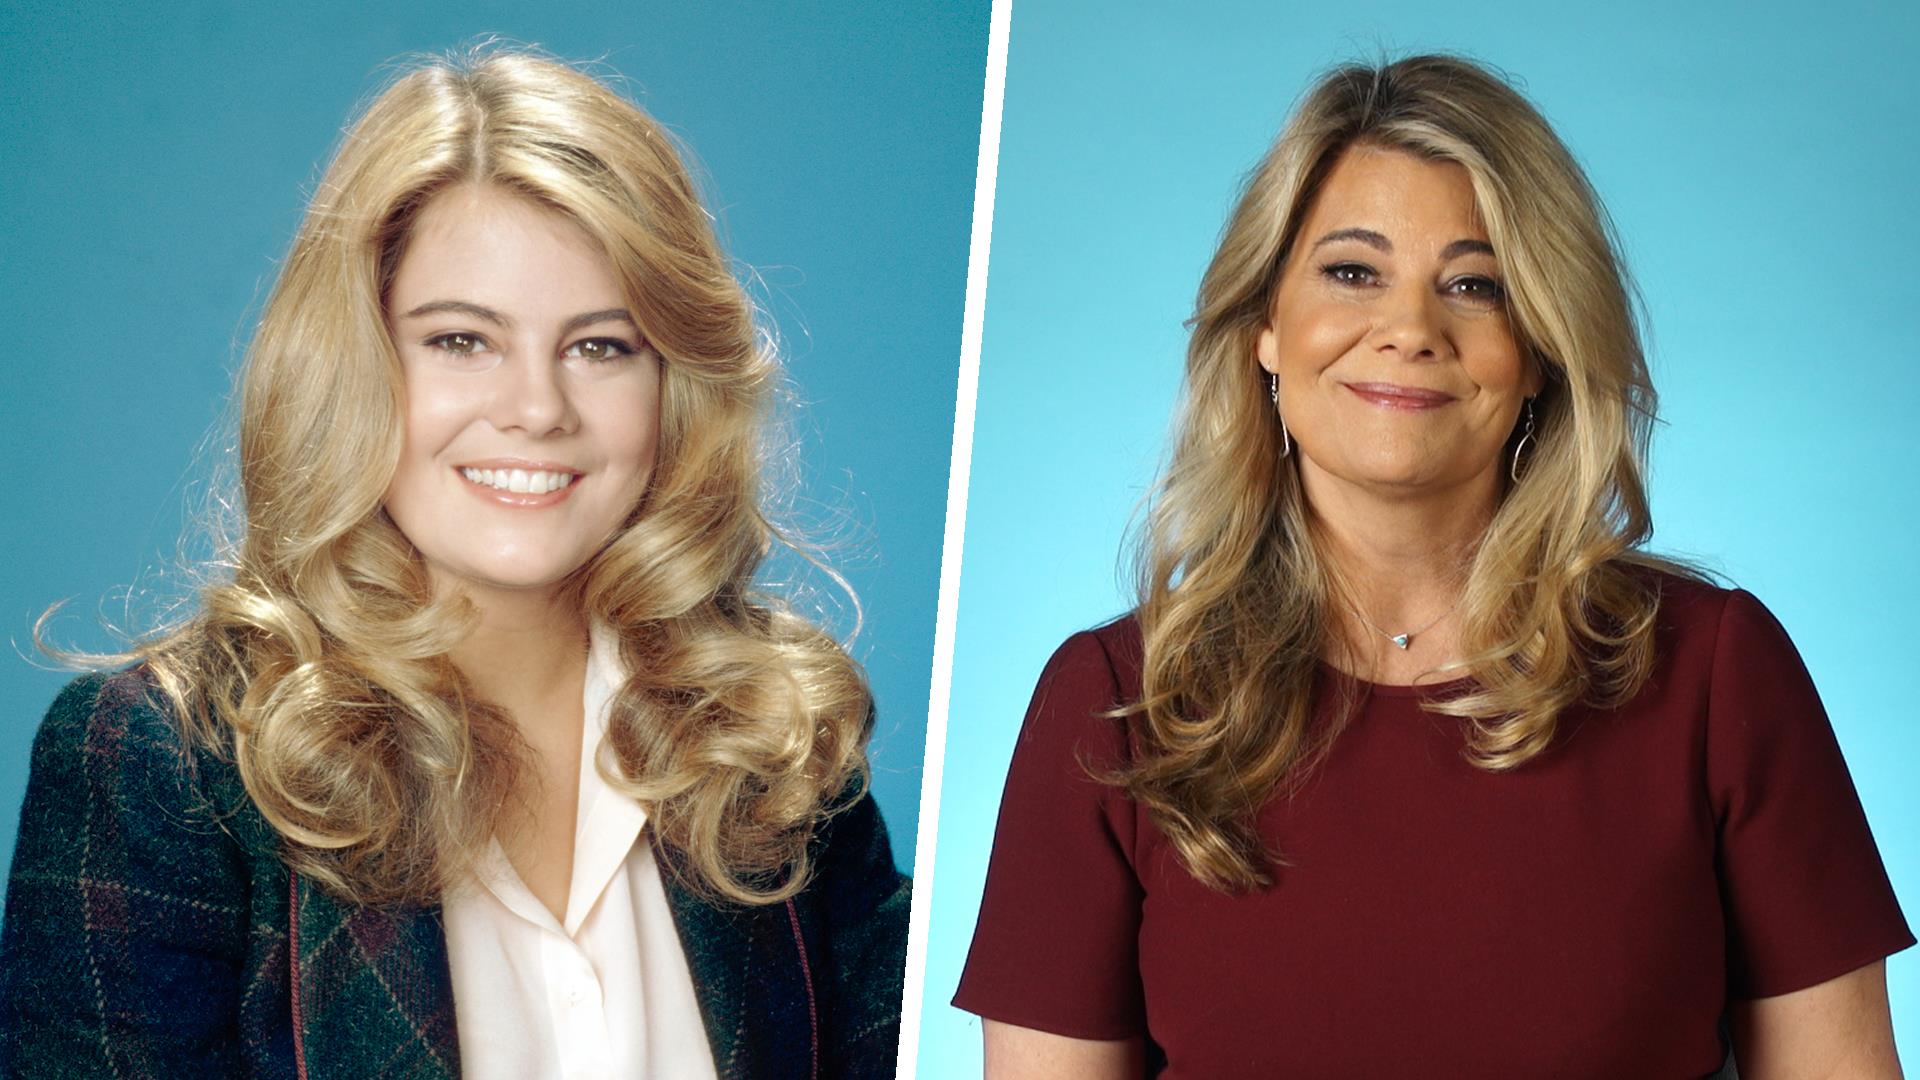 Facts of Life' star Lisa Whelchel talks kissing George Clooney